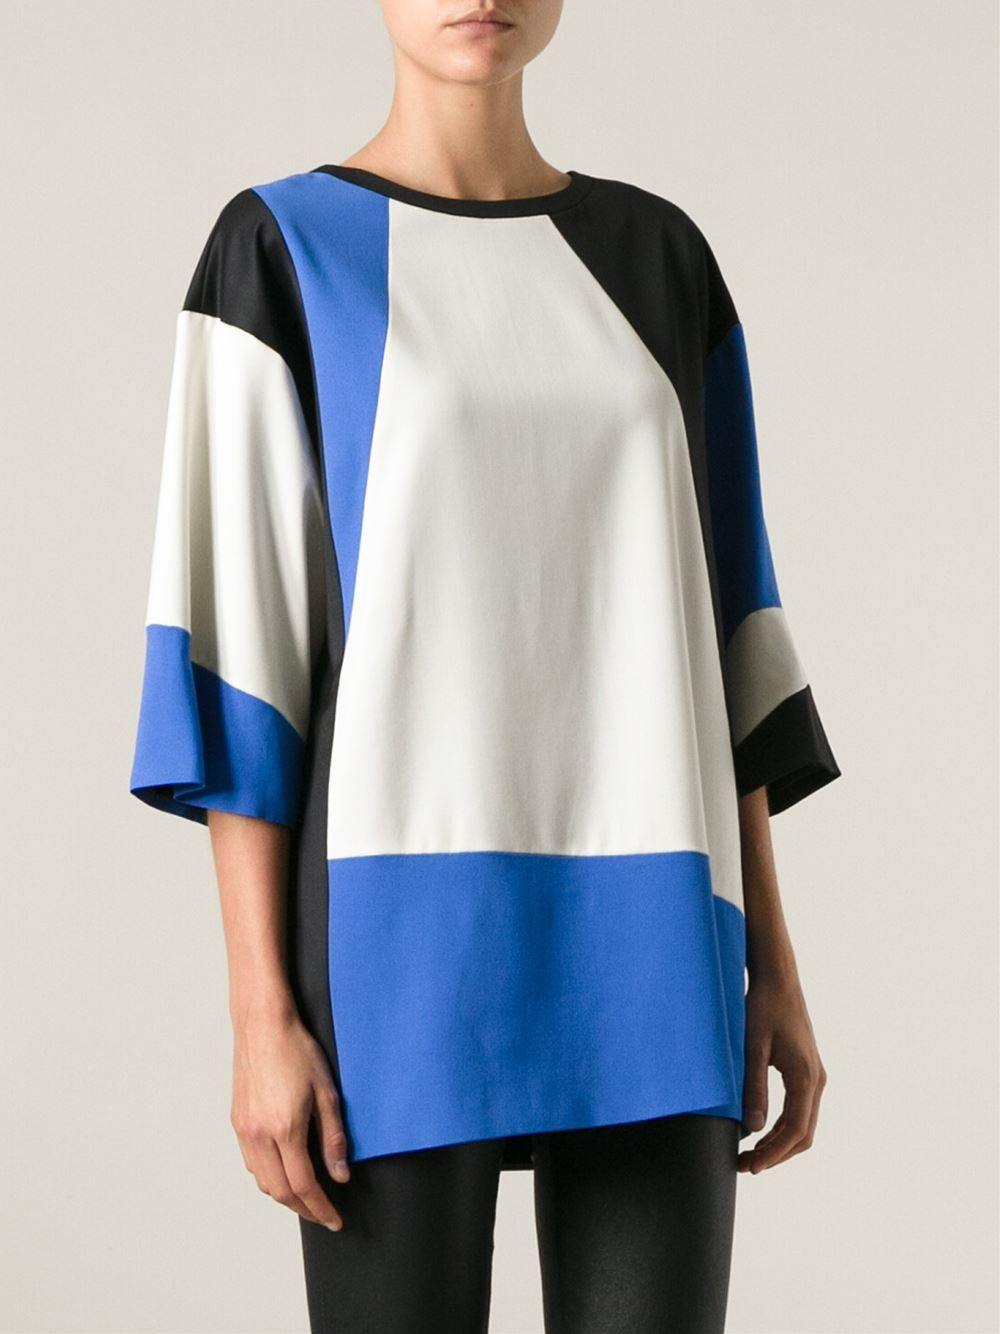 Lyst Fausto puglisi Graphic Pattern  Oversized  T Shirt  in 